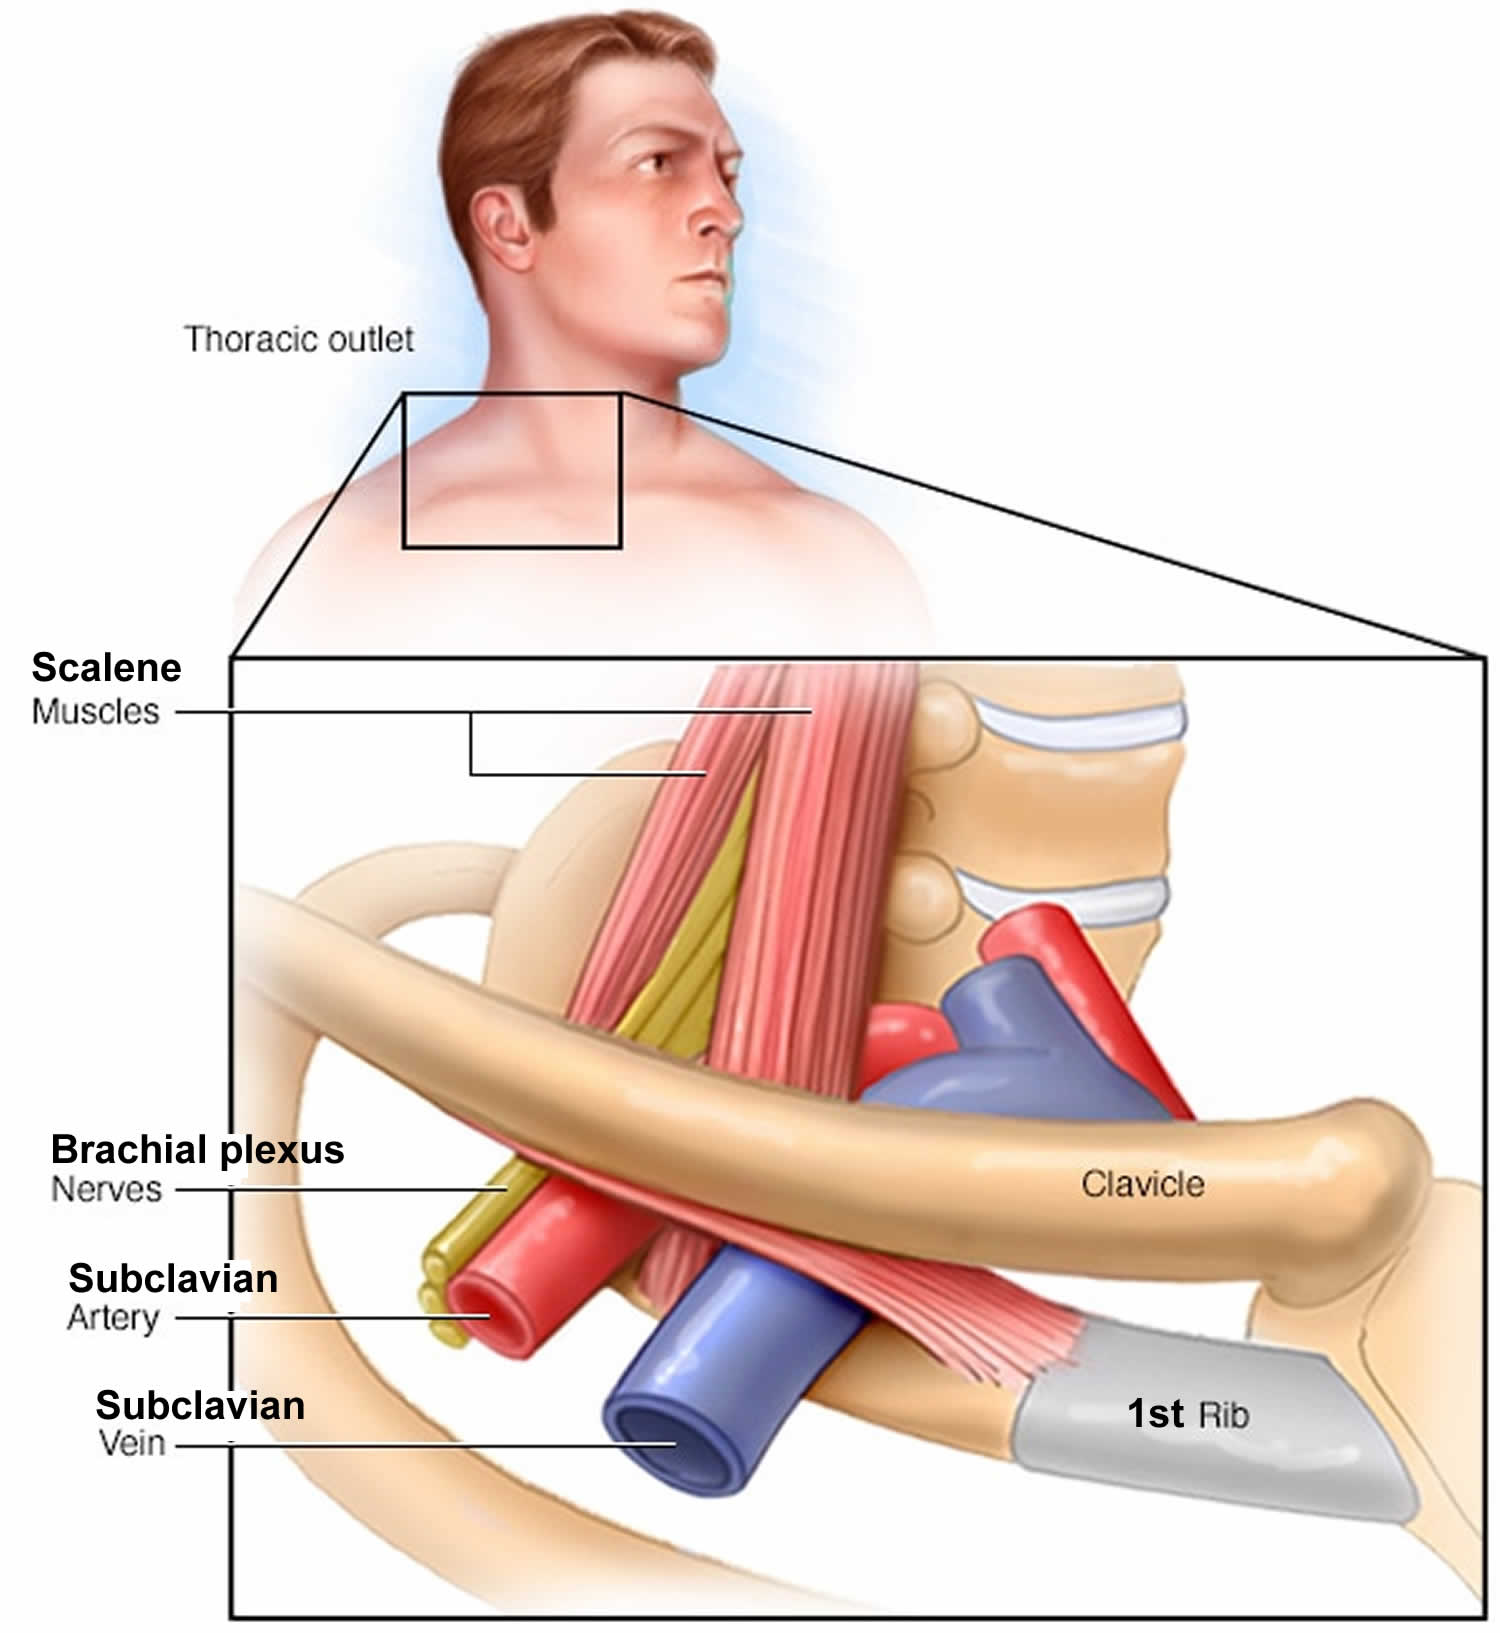 Thoracic outlet syndrome - WikiLectures